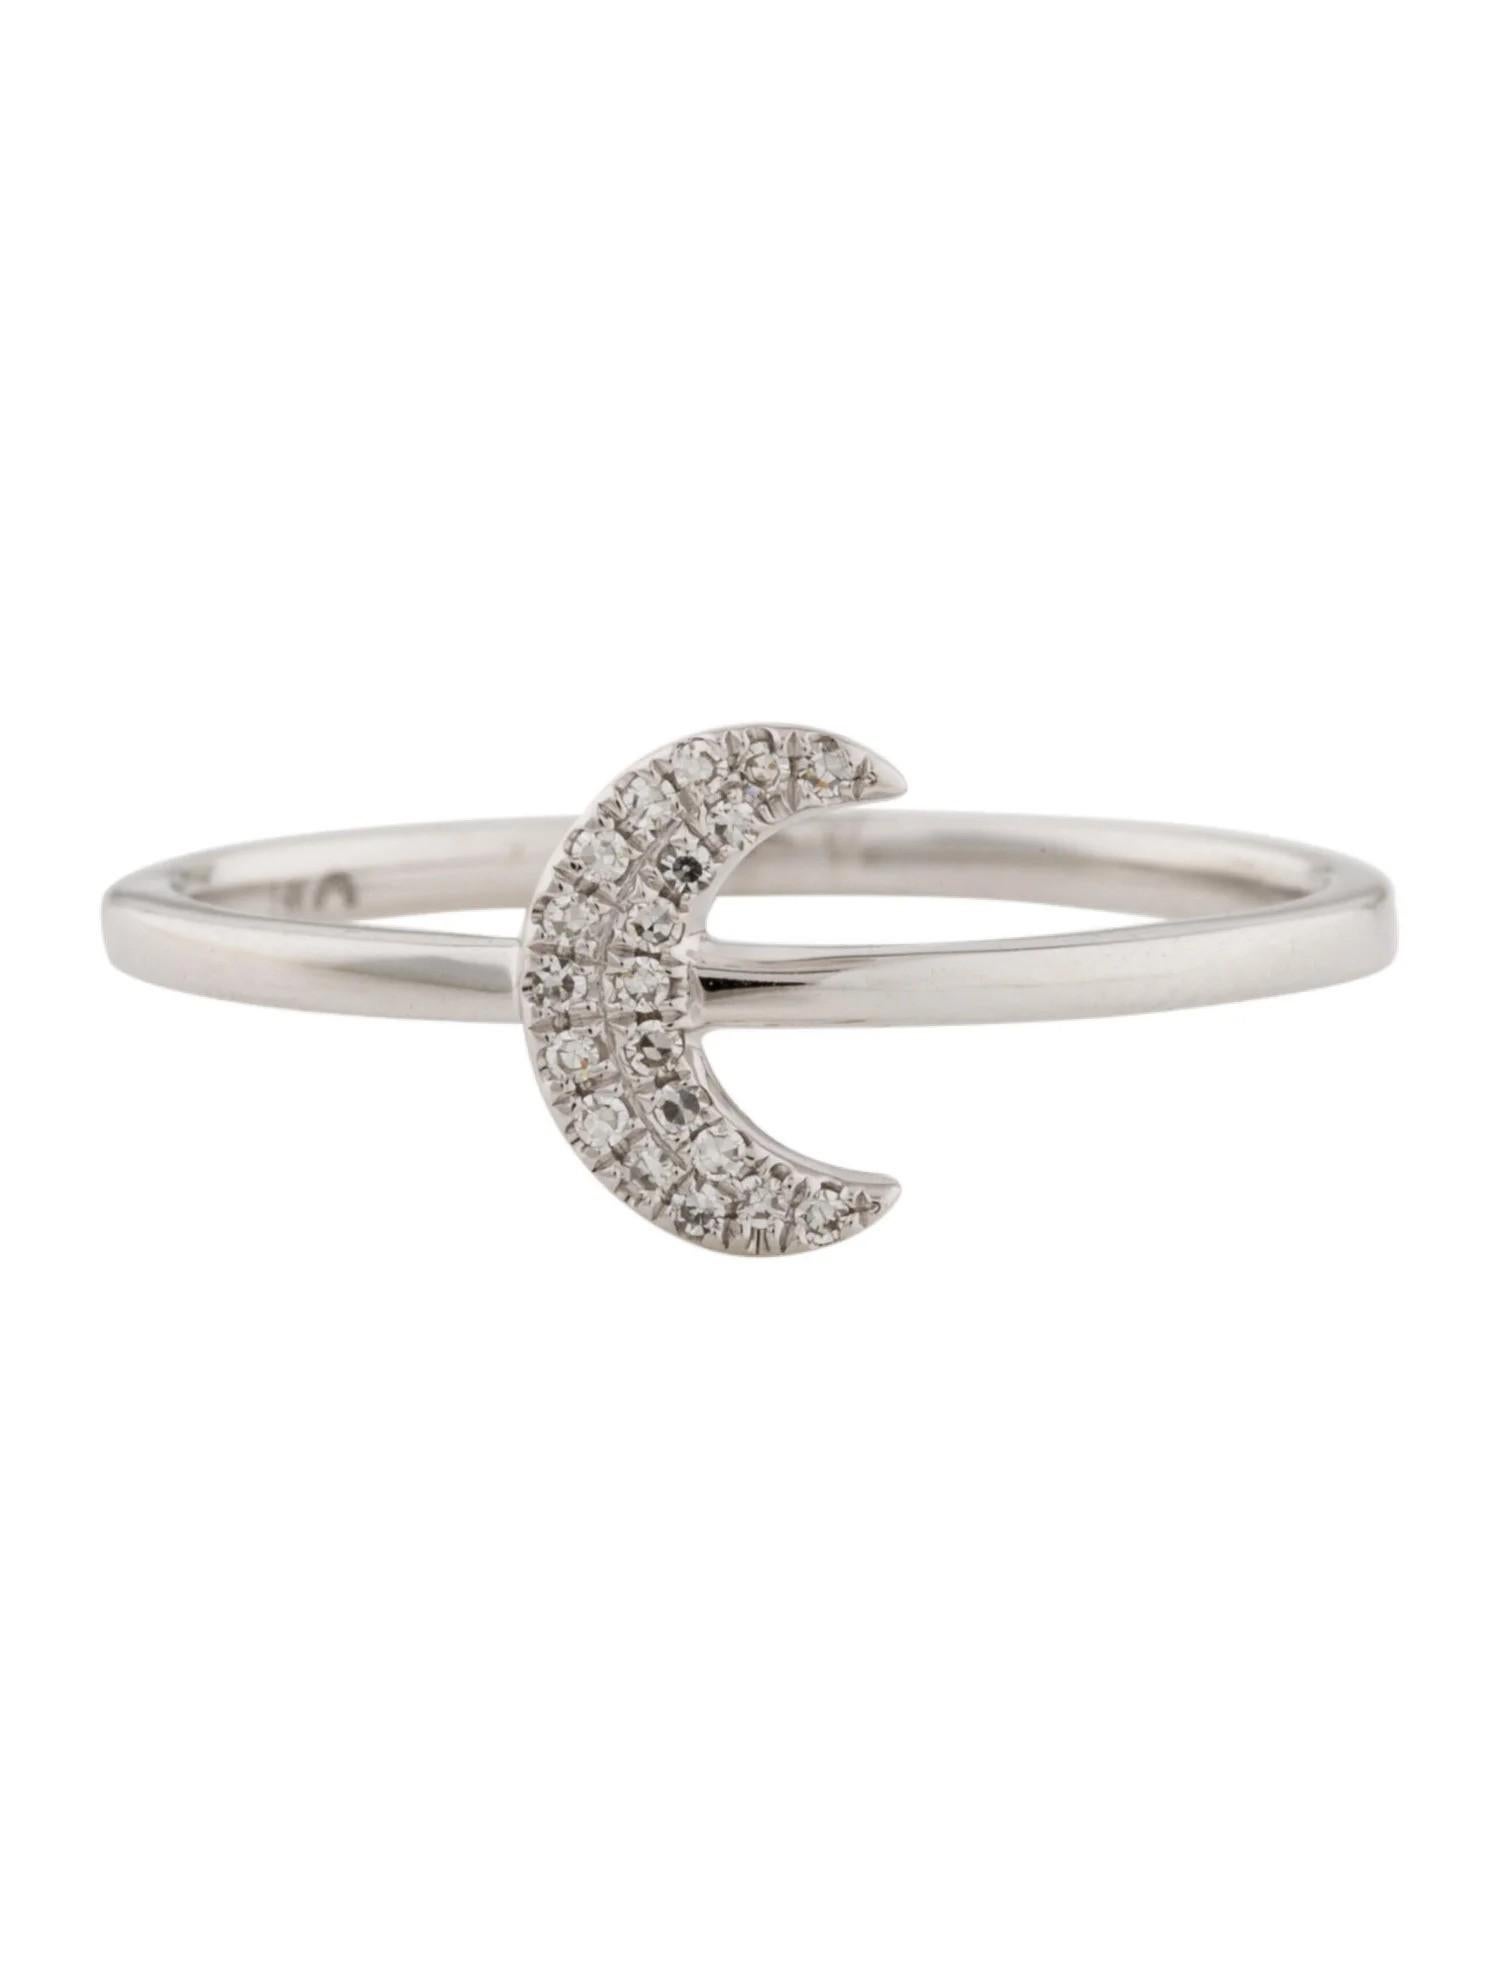 This Diamond Ring is a stunning and timeless accessory that can add a touch of glamour and sophistication to any outfit. This beautiful piece of jewelry features dazzling diamonds that sparkle and catch the light, making them the perfect choice for